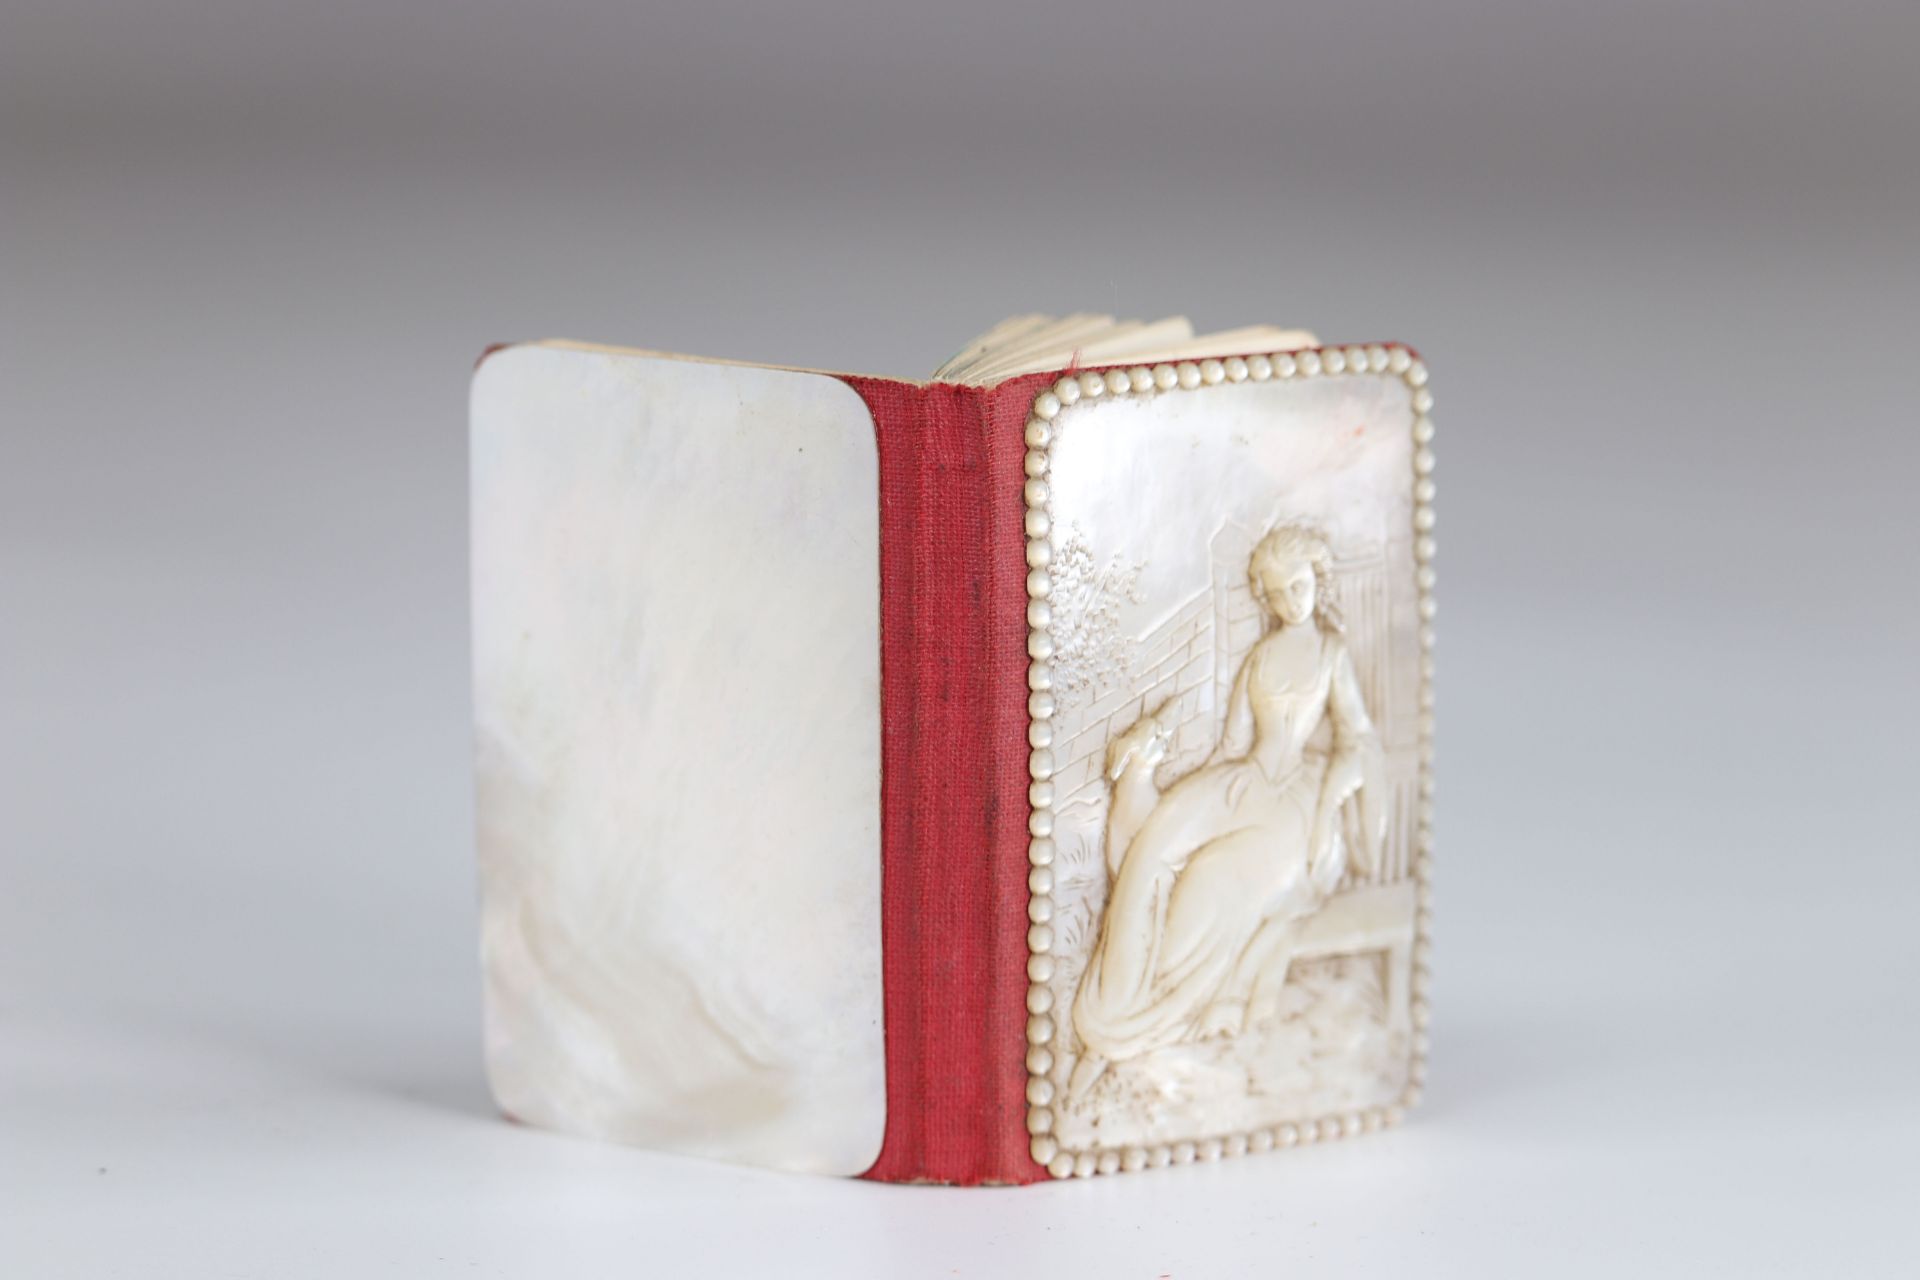 Carved mother-of-pearl ball book of a young woman with a greyhound - Image 2 of 3